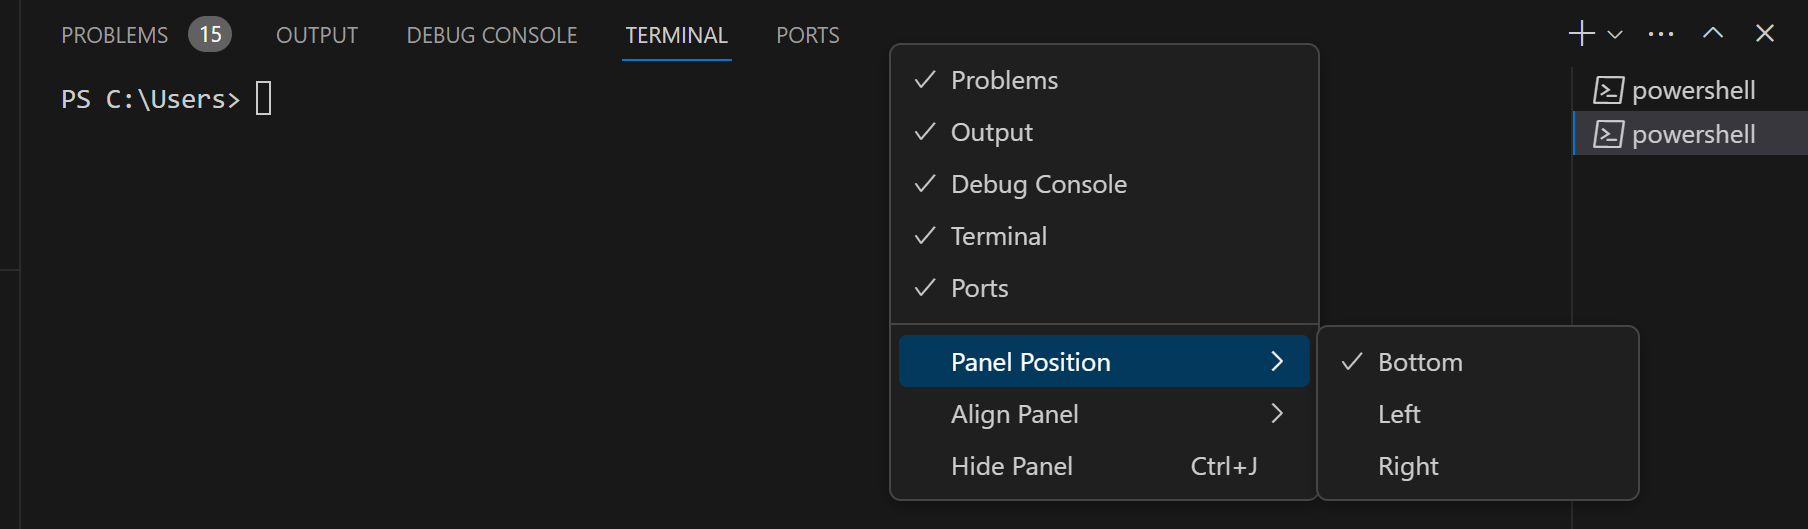 Panel title bar context menu with Panel Position options